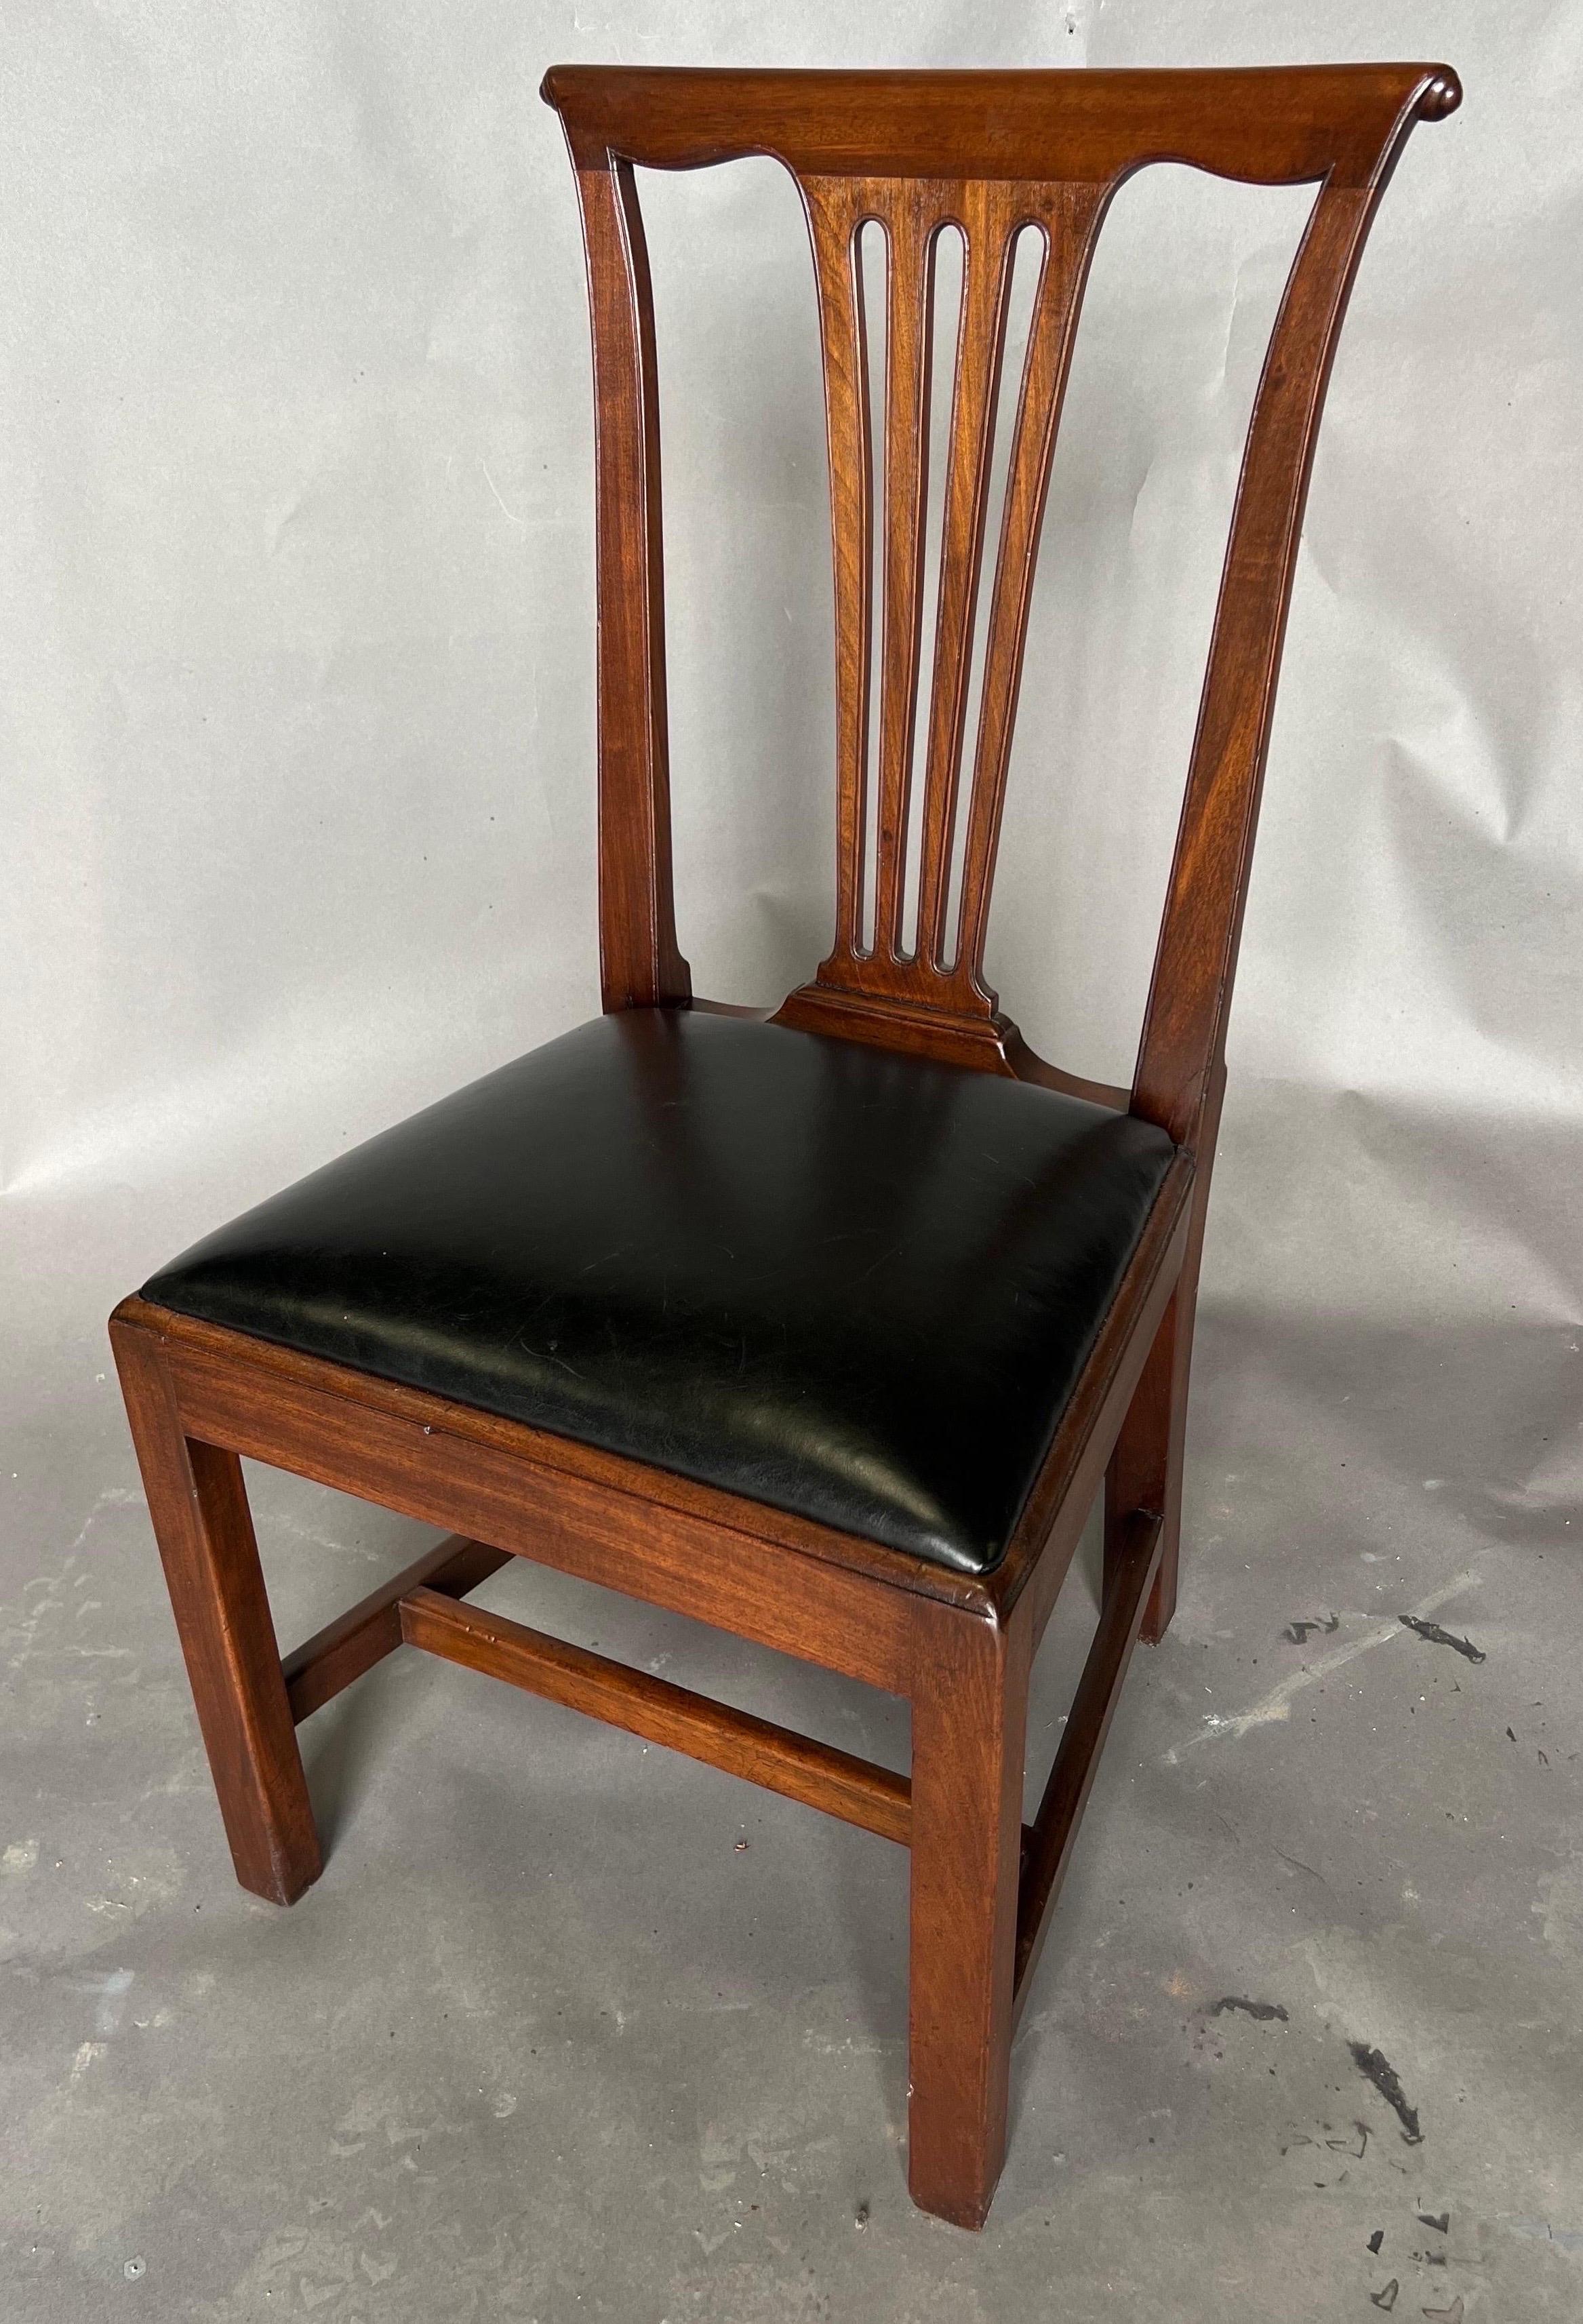 Alexandria, VA attributed 18th century mahogany side chair with typical flat top/serpentine bottom crest rail. Posts flare out slightly. Back legs square and with slight backward flare. Front legs square. H stretcher with one slightly higher